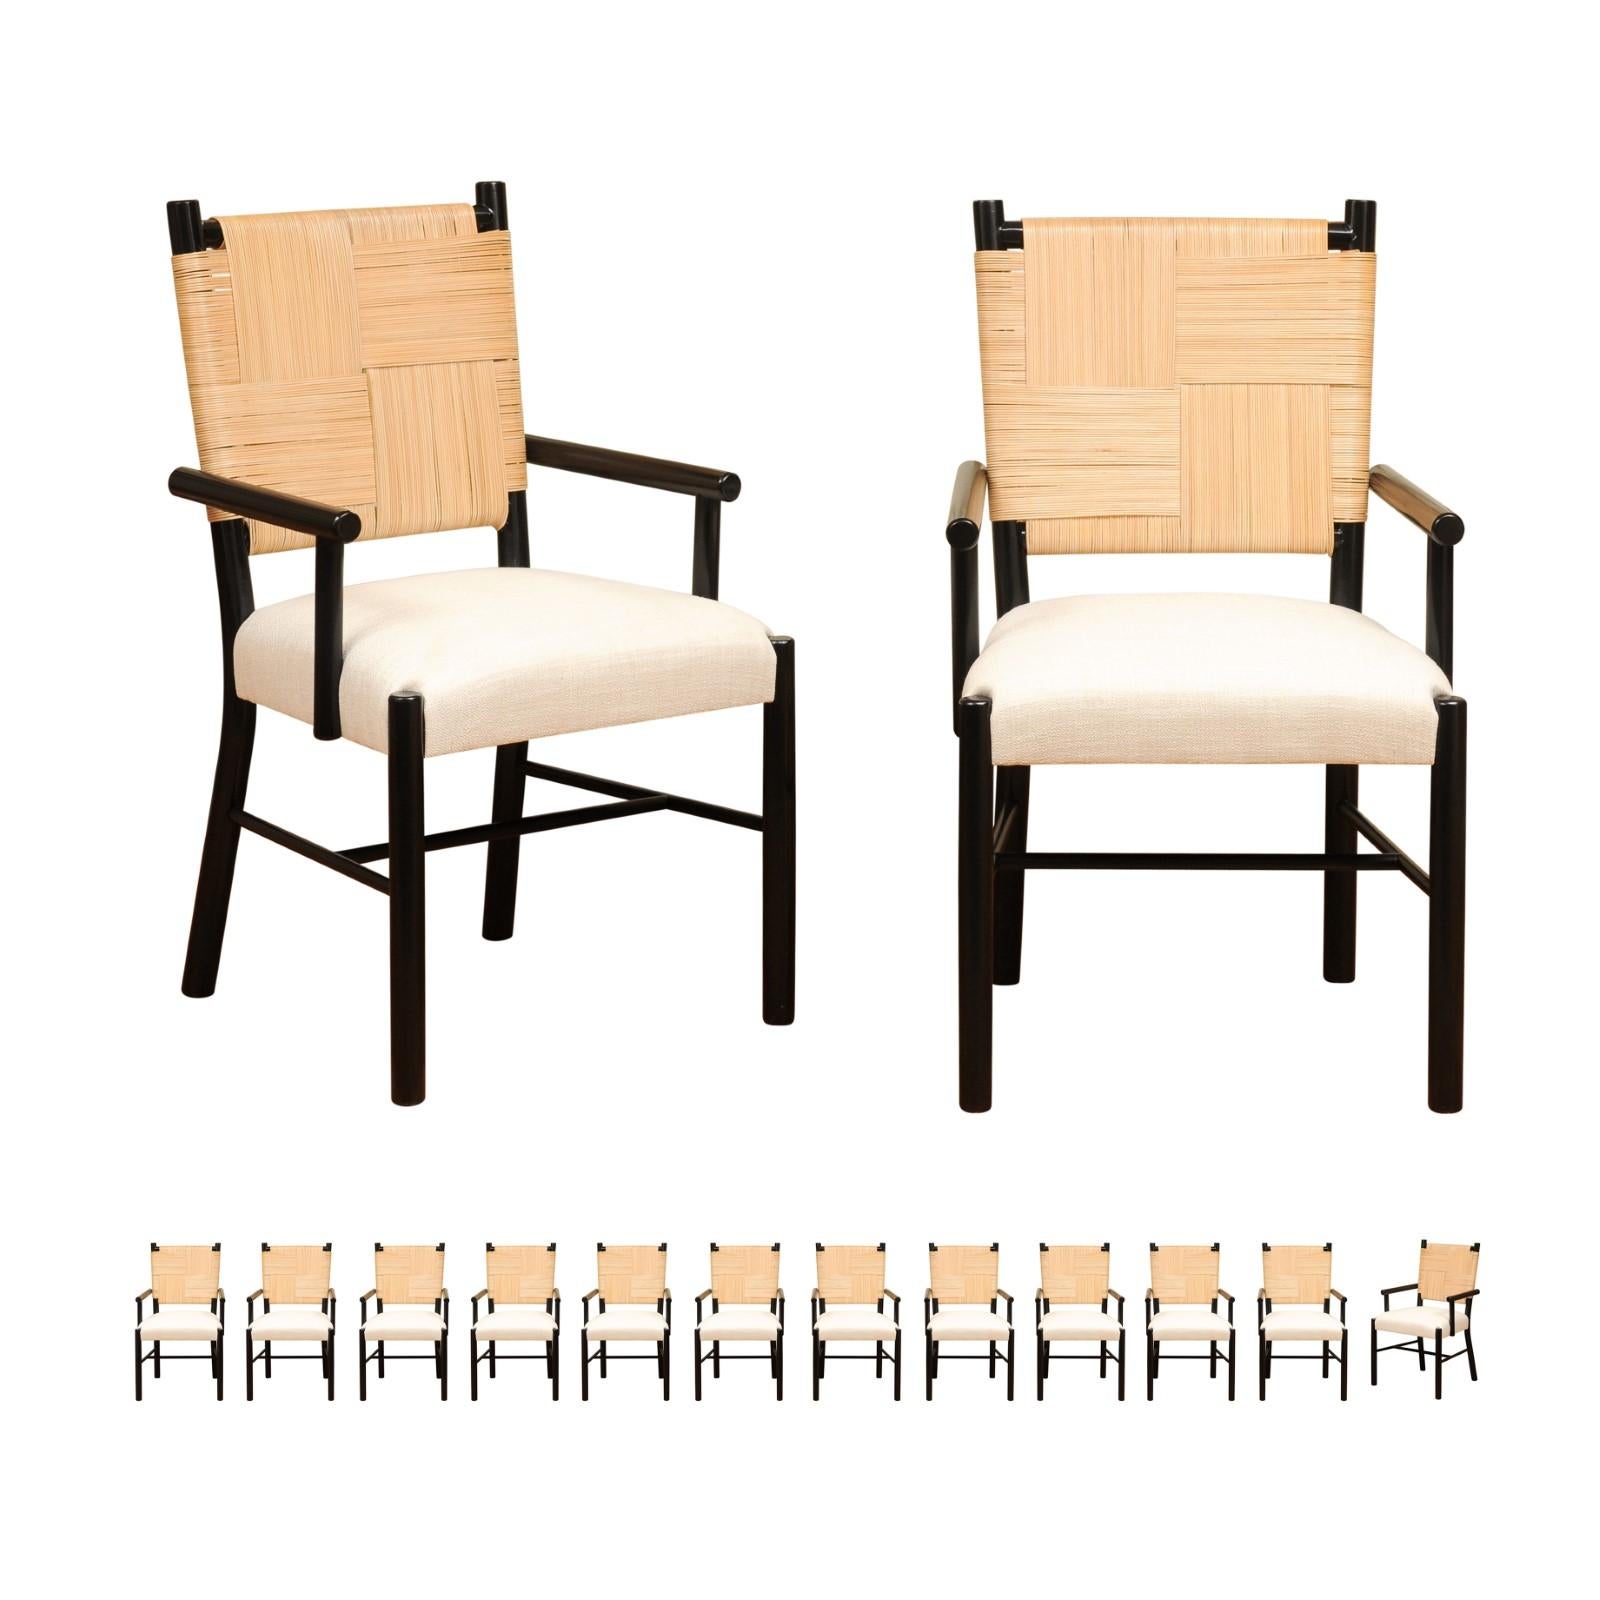 All Arms- Sublime Set of 14 Cane Back Dining Chairs by John Hutton for Donghia For Sale 12